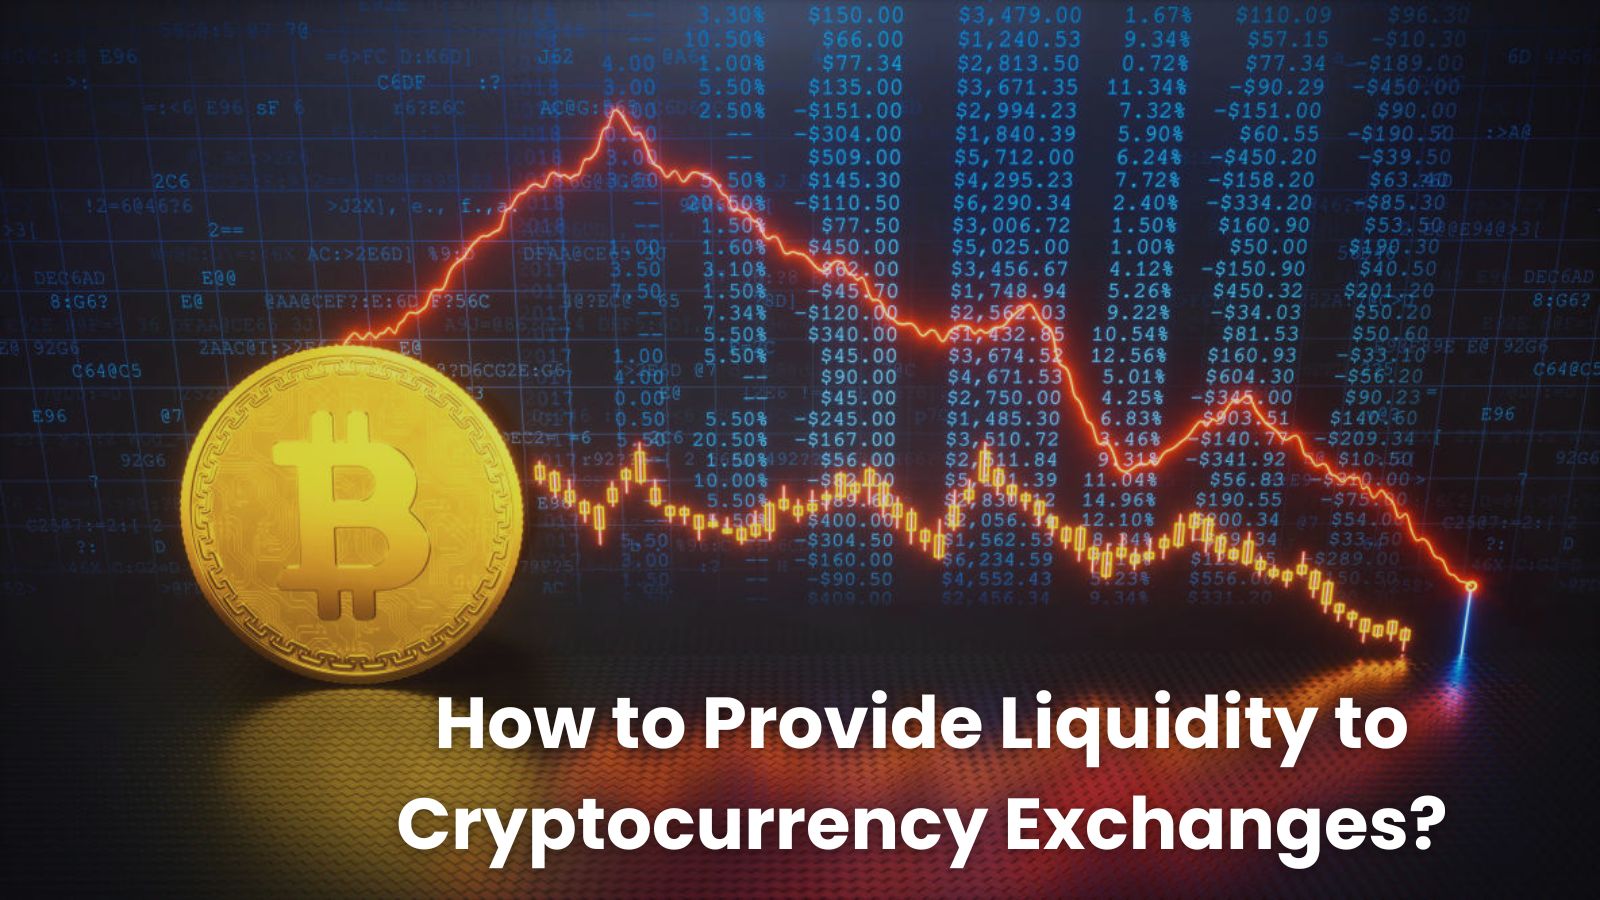 How to Provide Liquidity to Cryptocurrency Exchanges?